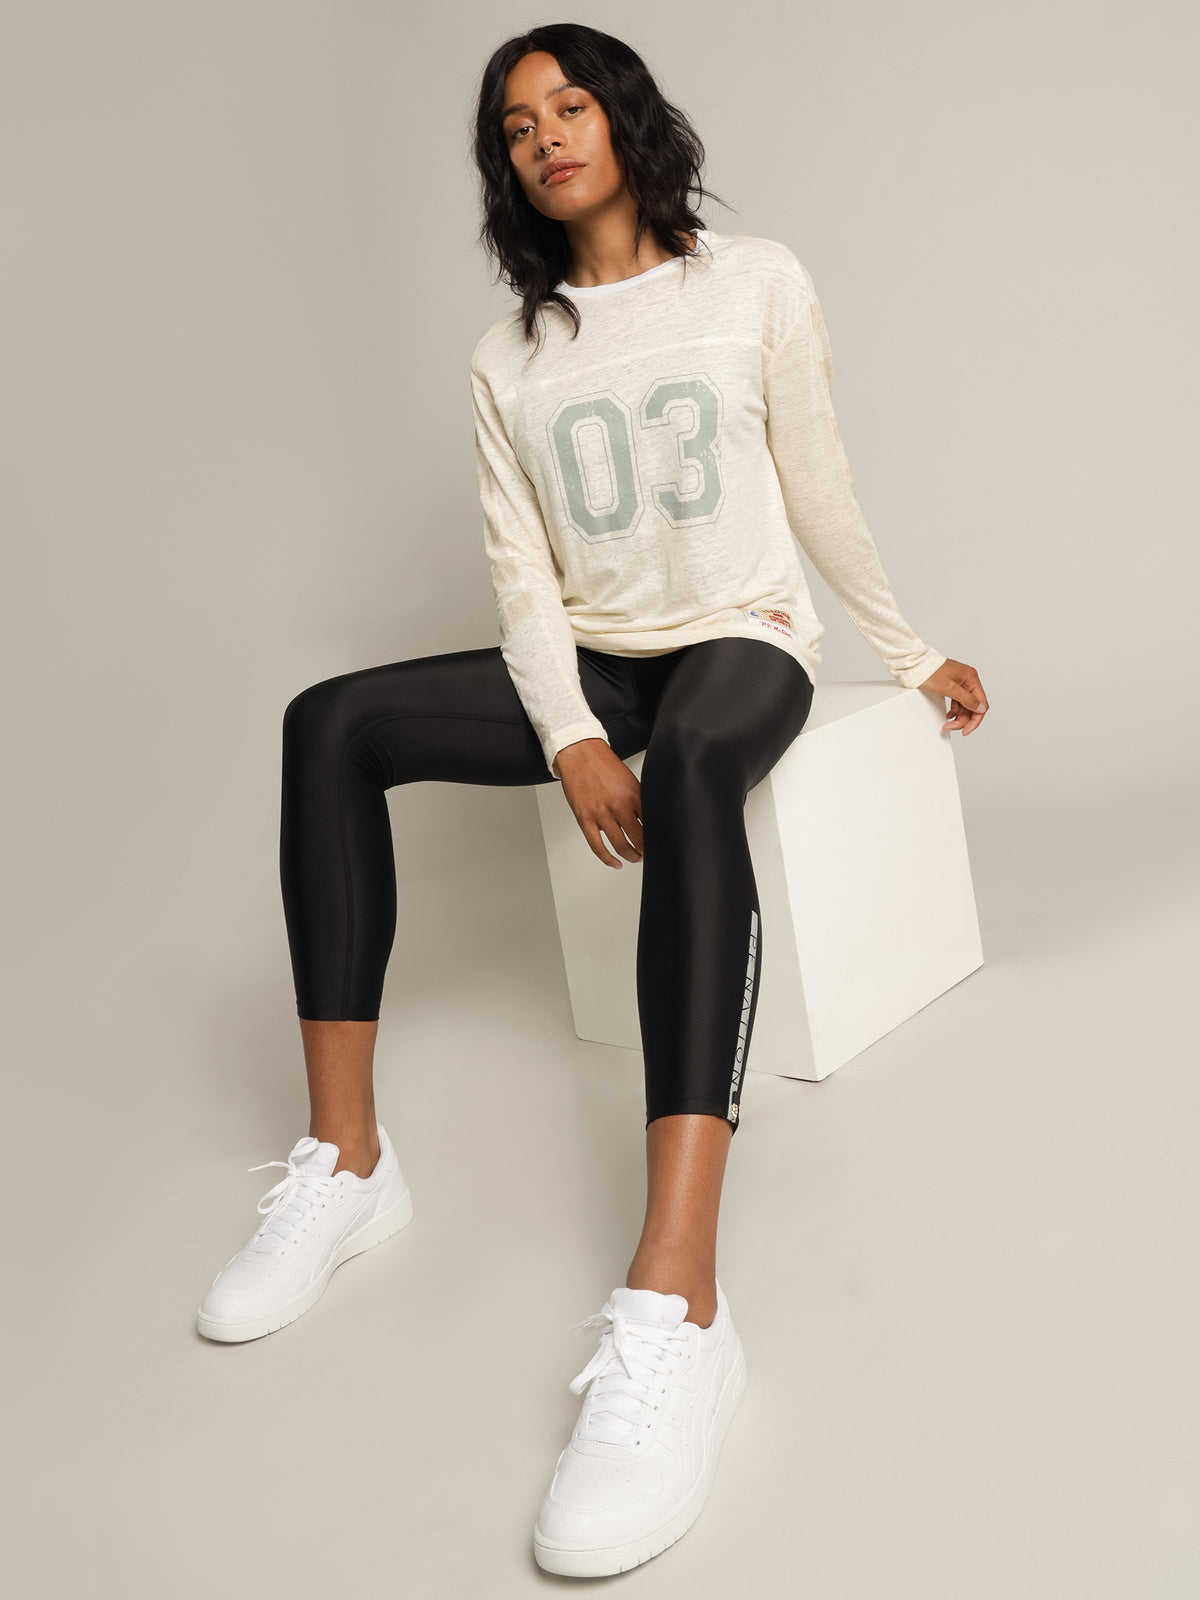 Goal Side Long Sleeve T-Shirt in Pearled Ivory